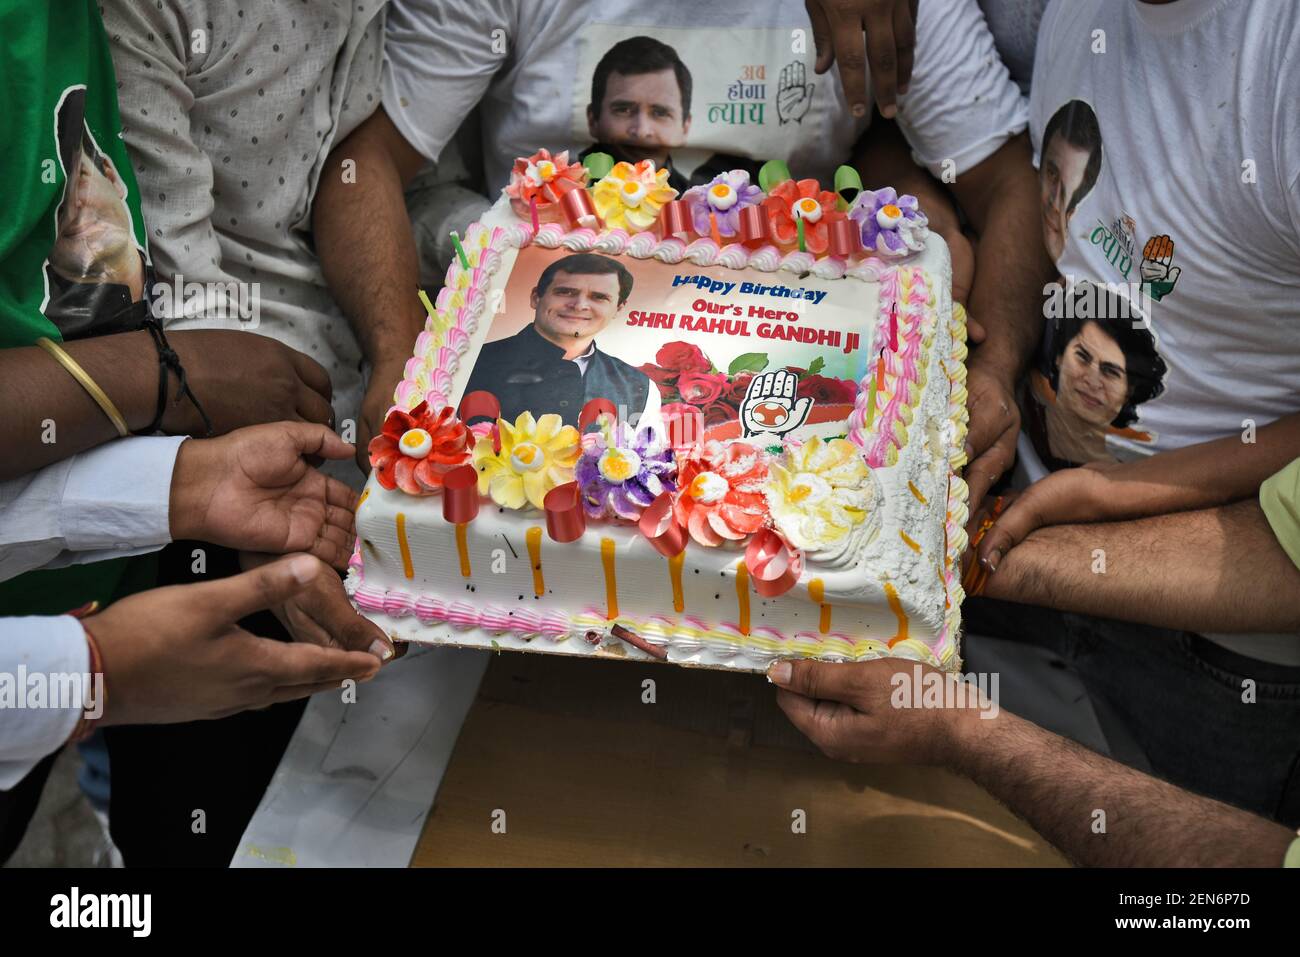 NEW DELHI, INDIA - JUNE 19: Congress party supporters hold a cake ...